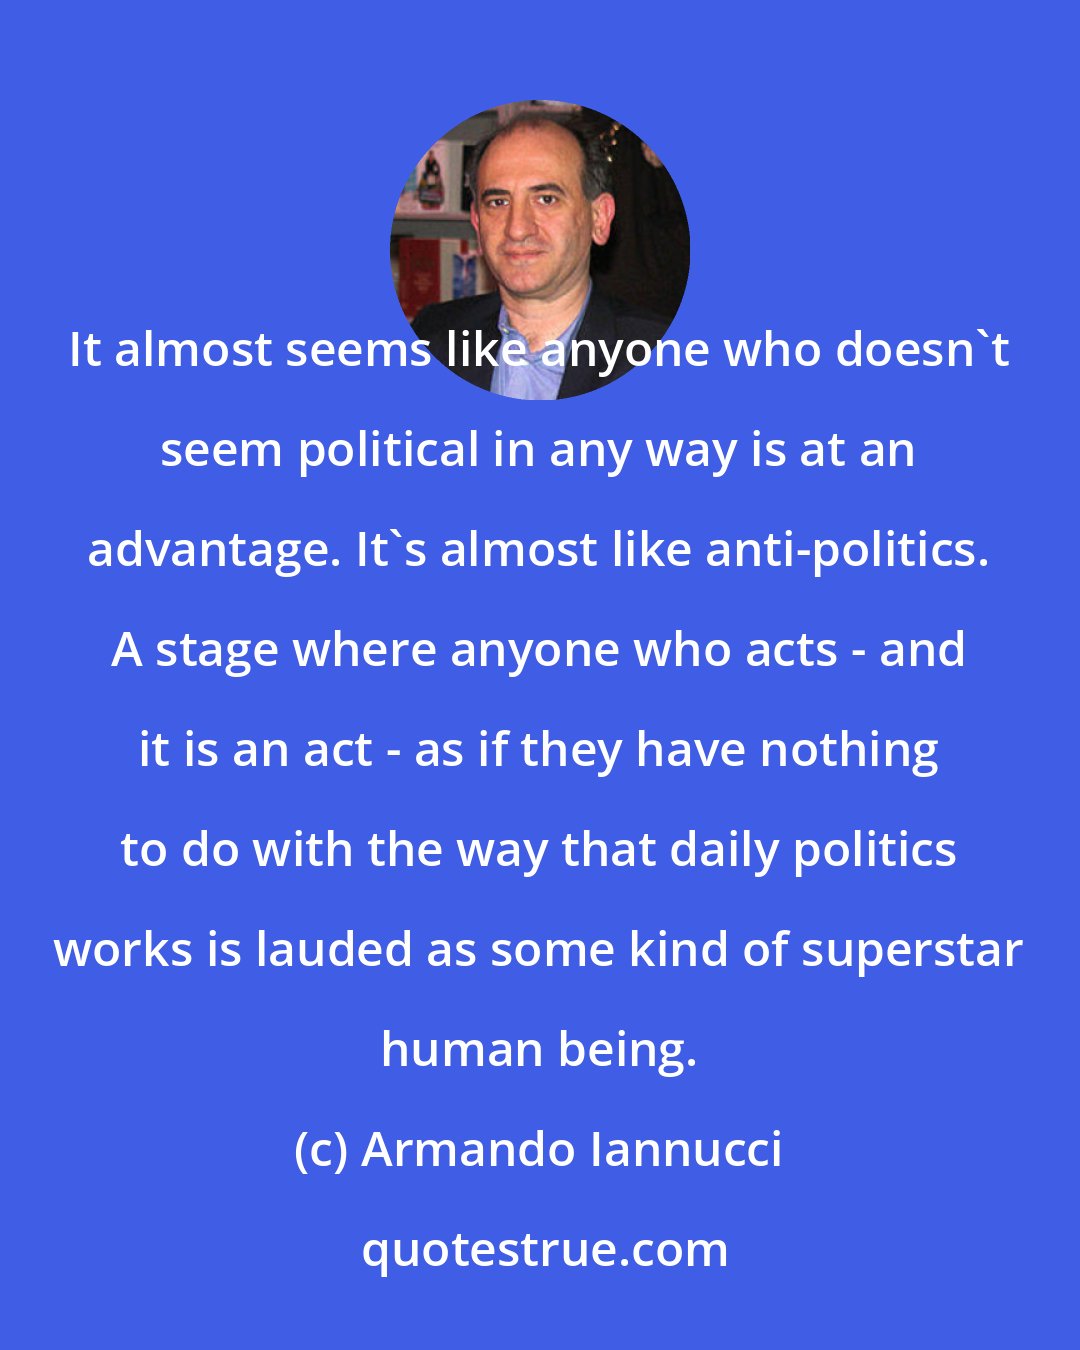 Armando Iannucci: It almost seems like anyone who doesn't seem political in any way is at an advantage. It's almost like anti-politics. A stage where anyone who acts - and it is an act - as if they have nothing to do with the way that daily politics works is lauded as some kind of superstar human being.